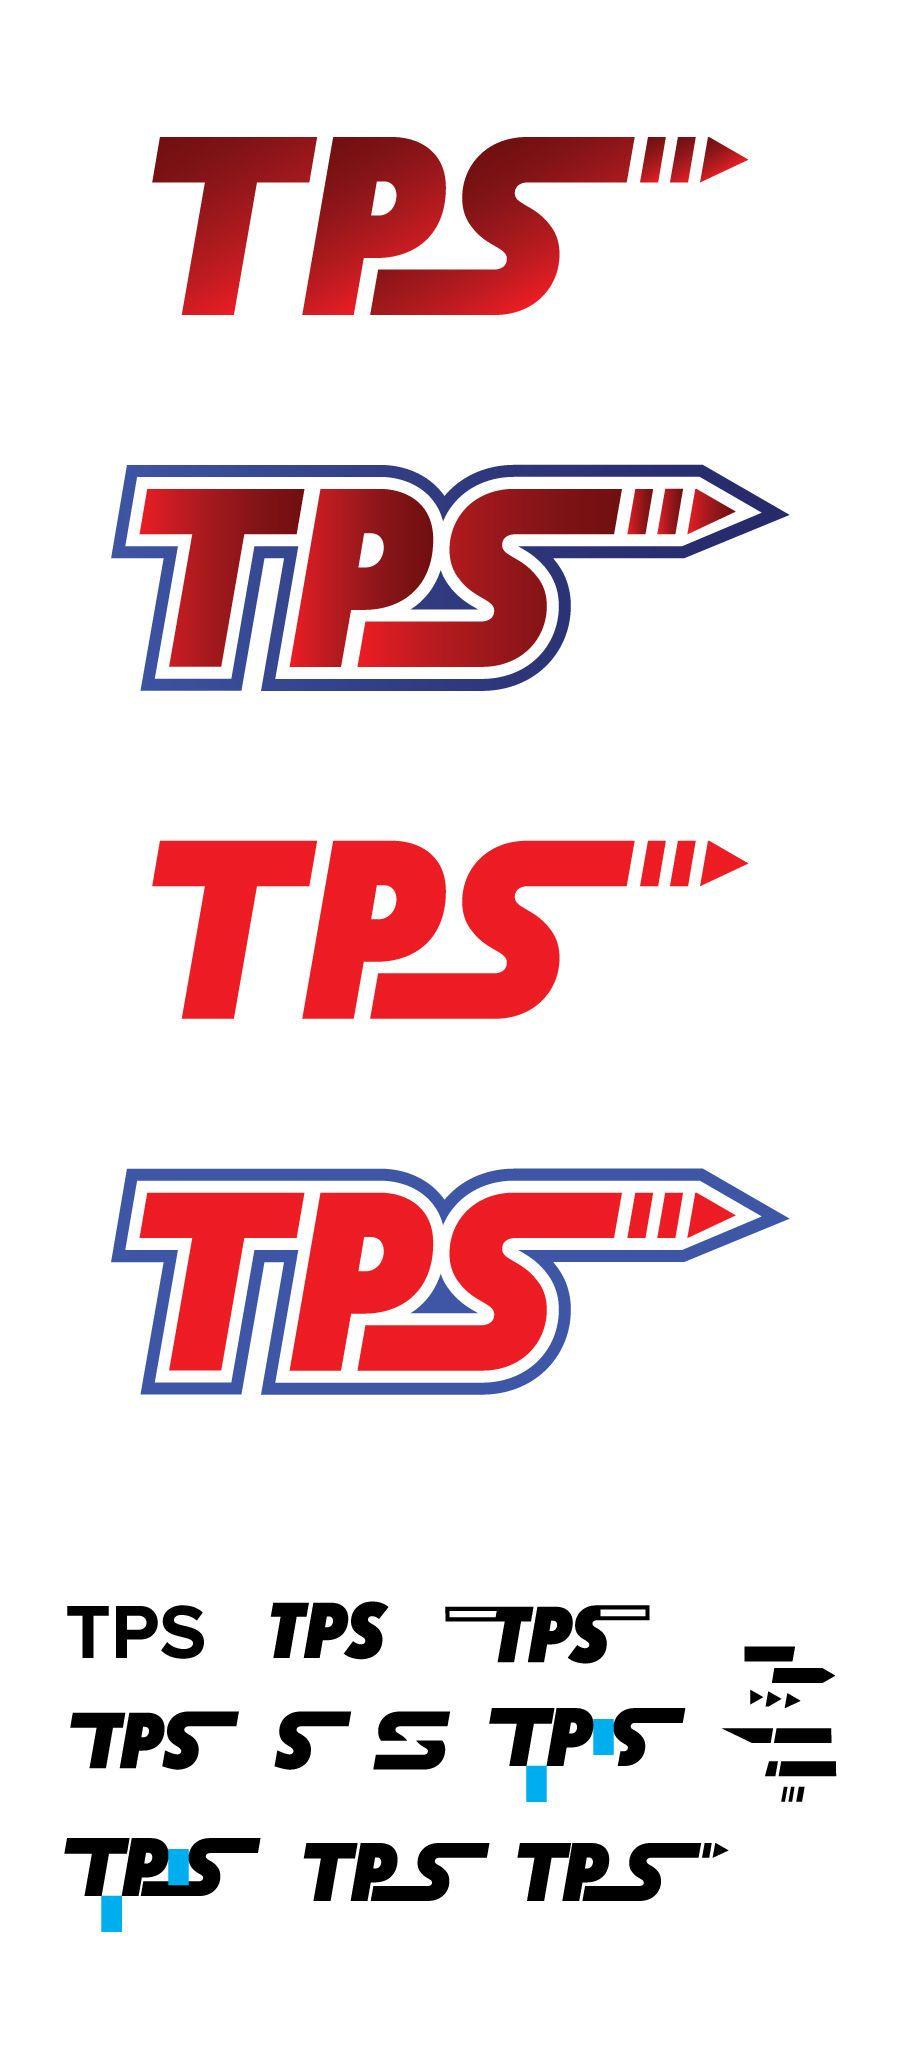 TPS Logo - Entry by Pafey for Simple 3 letter logo made with the letters